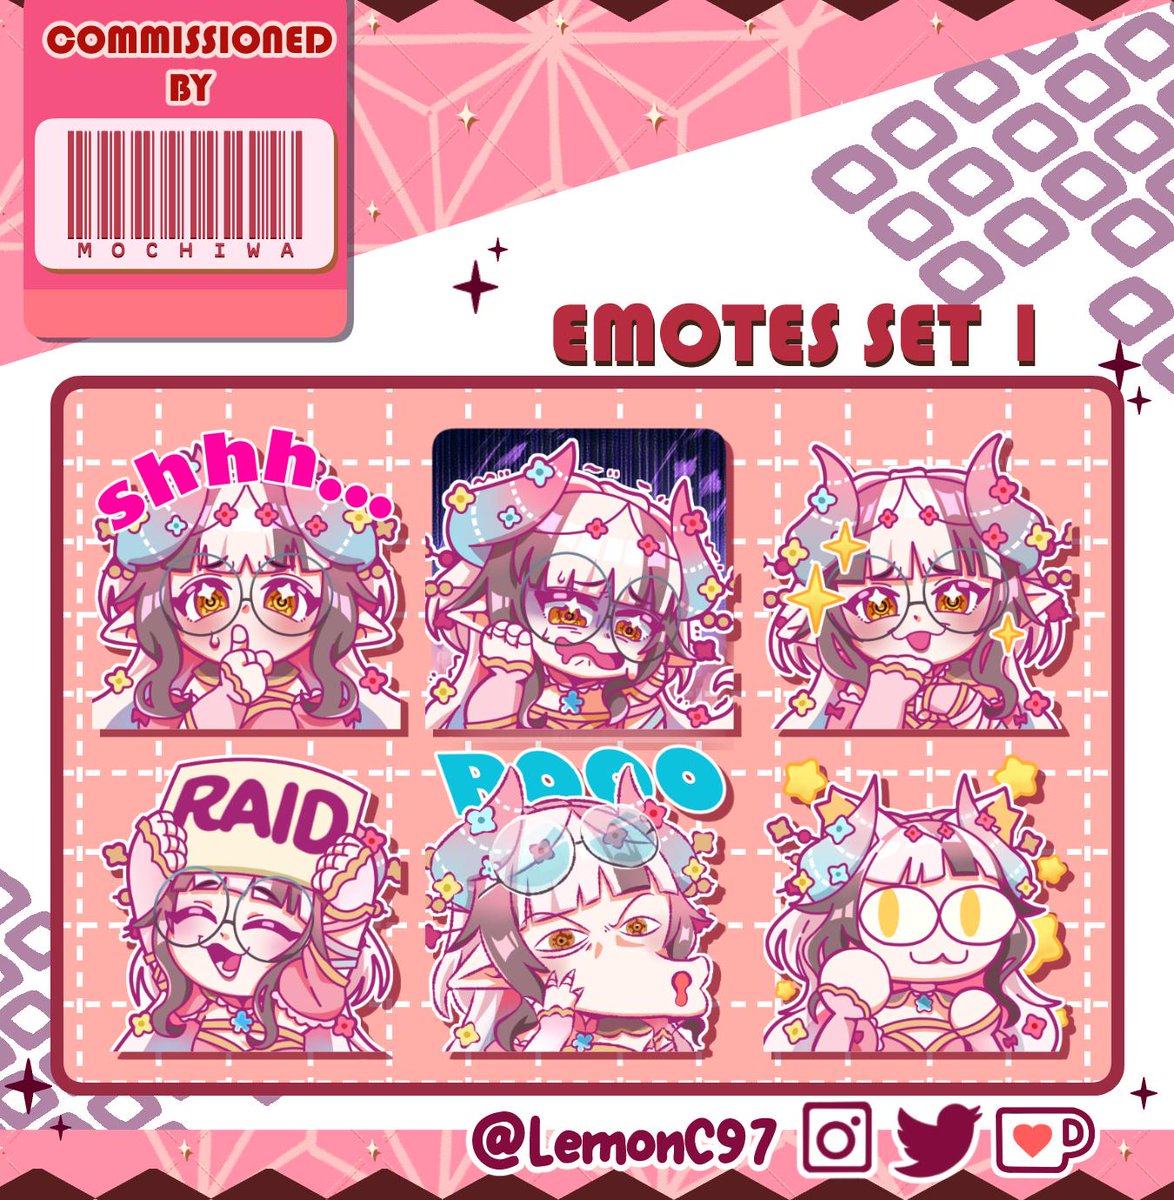 [Repost sorry forgot smthing]
My first stream badge c☆mmission ed by @mochiwasabii

Thank you so much for c☆mmissi☆ning me! She is so pink n flowery 🌸💕

📩Commission link in reply📩

❤️ & 🔄 appreciated 
#twitchemotes #twitch #Vtuber #commissionsopen